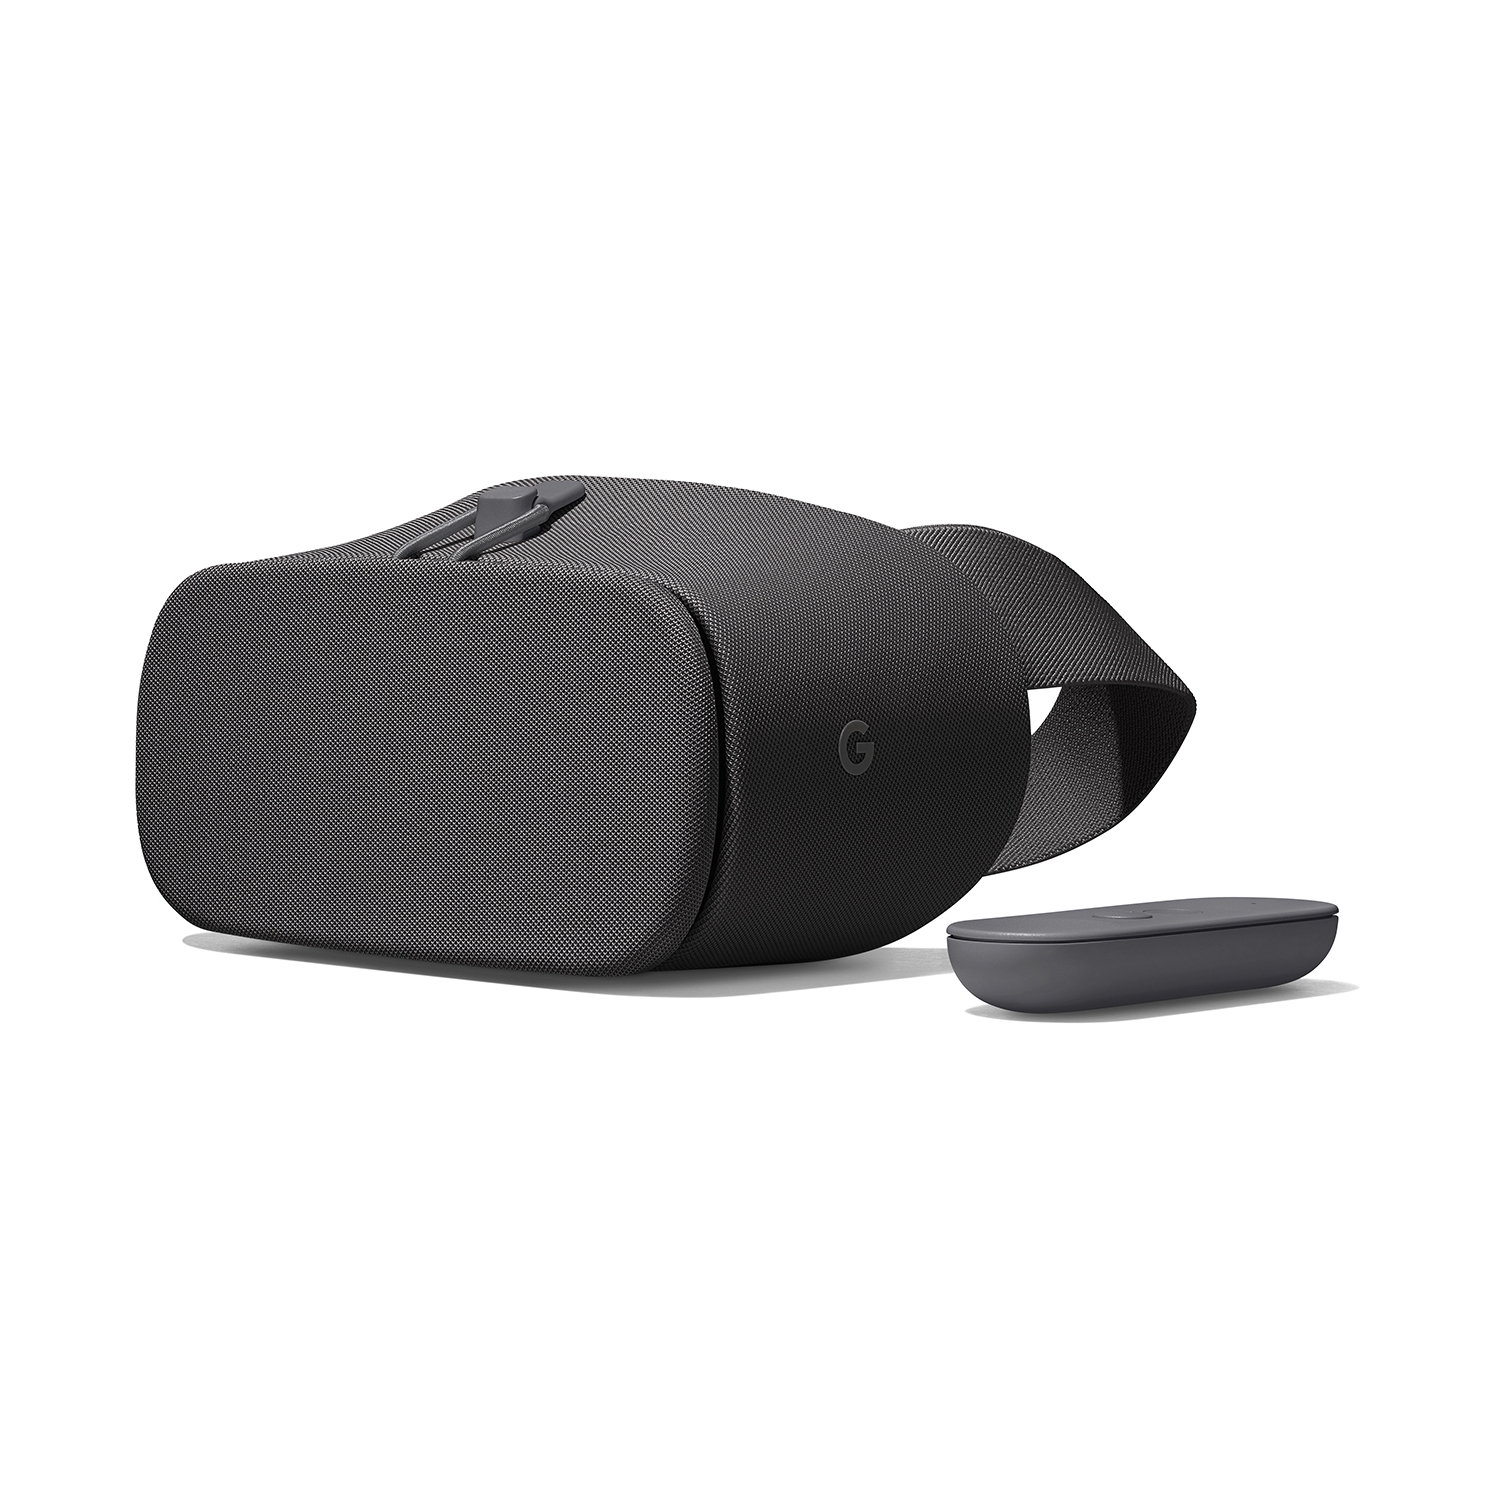 Google Daydream View VR Headset 2017 Edition - Charcoal | Best Buy